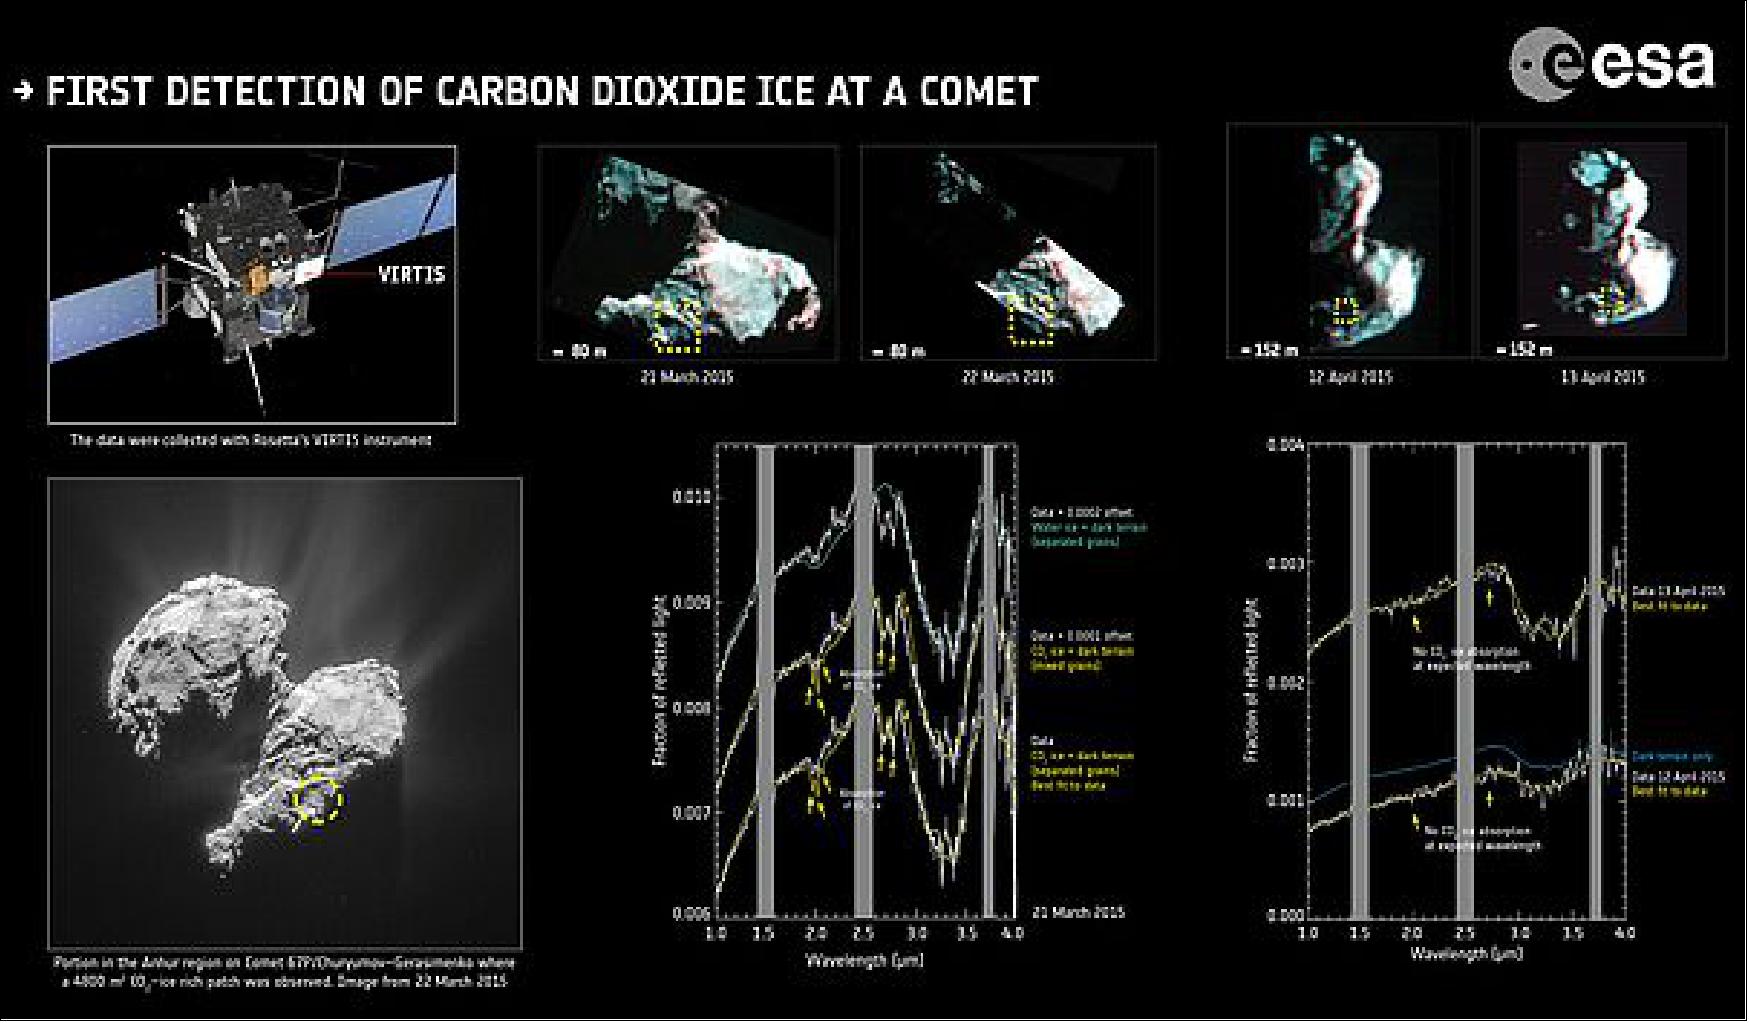 Figure 92: First detection of carbon dioxide at a comet (image credit: data: ESA/Rosetta/VIRTIS/INAF-IAPS/OBS DE PARIS-LESIA/DLR; Reprinted with permission from G. Filacchione et al., Science 10.1126/science.aag3161 (2016); context image: ESA/Rosetta/NavCam – CC BY-SA IGO 3.0)